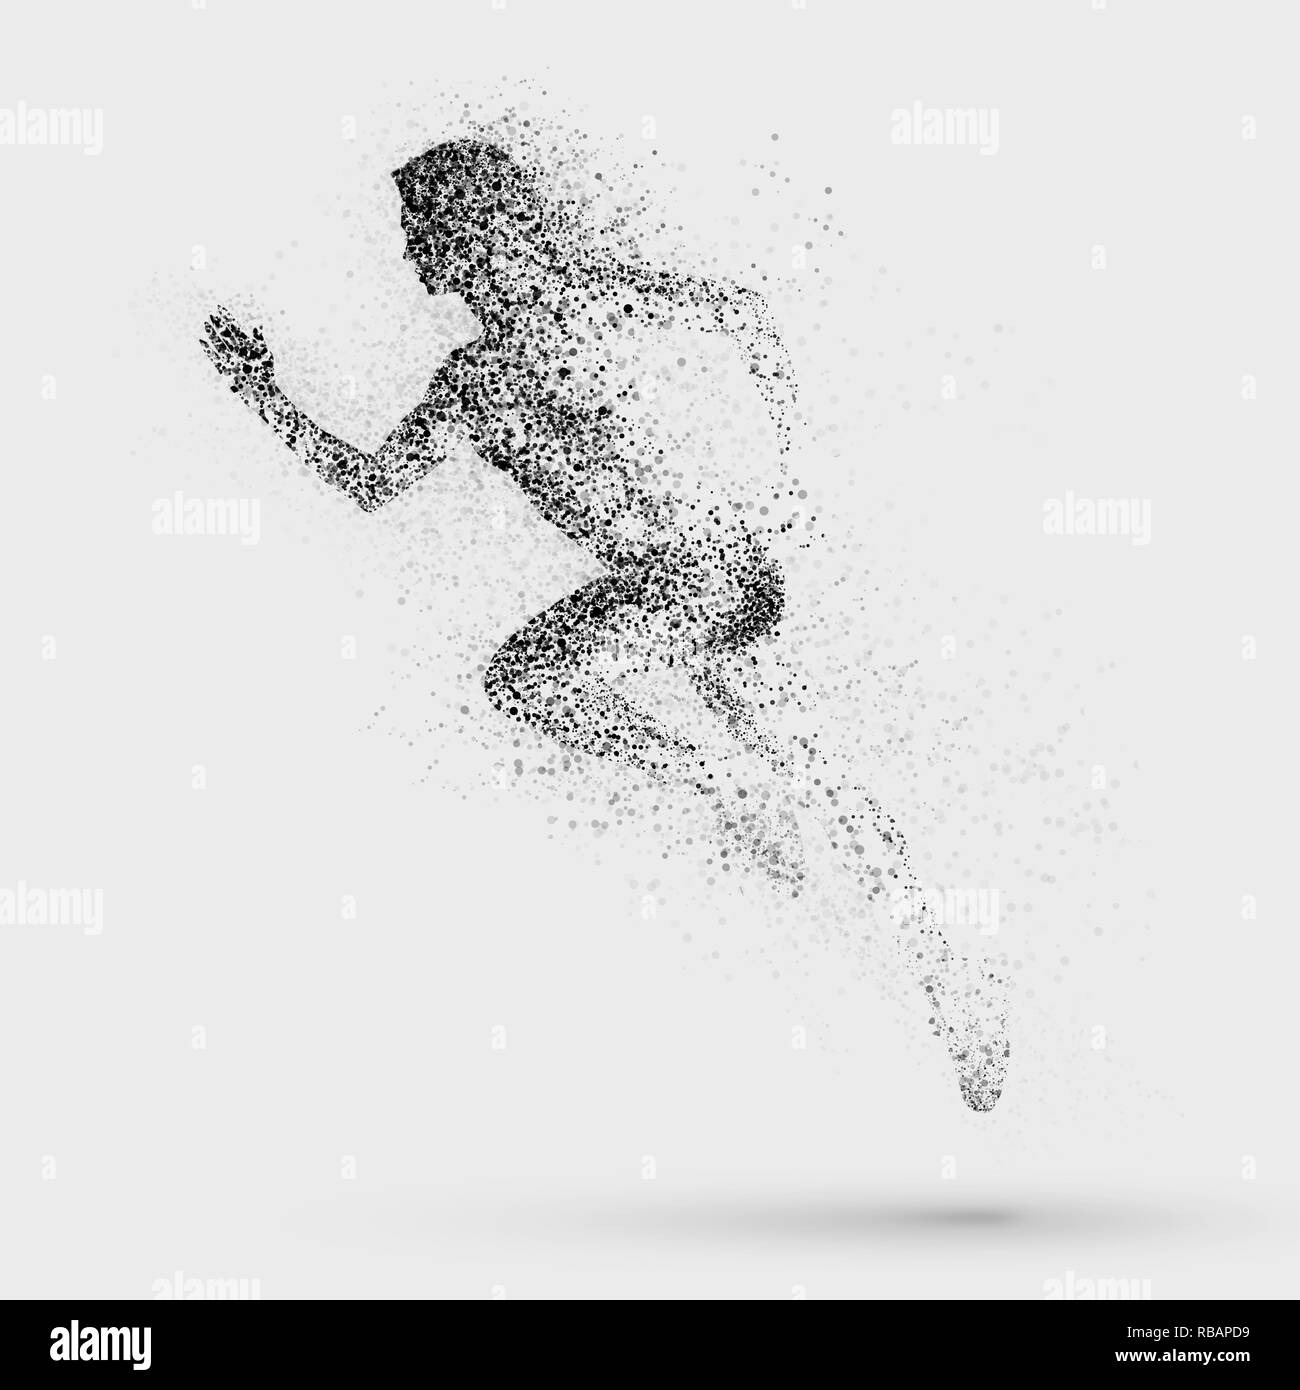 Black silhouette of running woman from particle divergent. Isolated on white background. Stock Photo